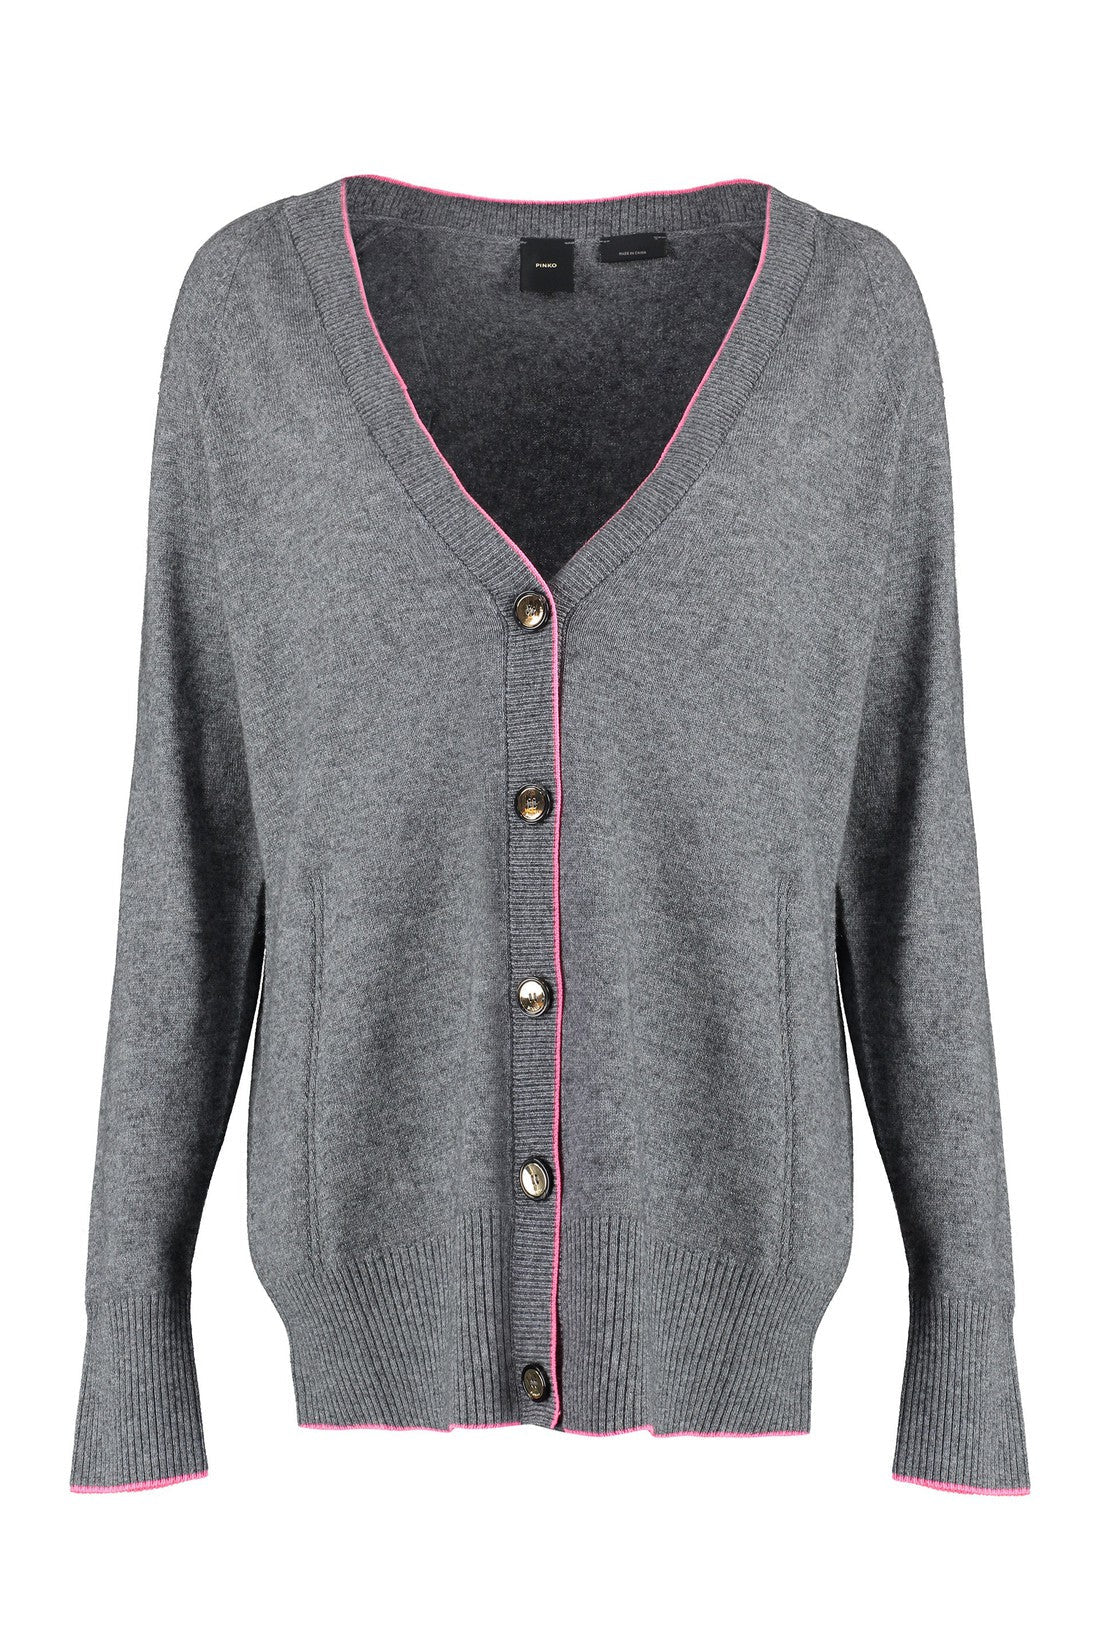 Pinko-OUTLET-SALE-Wool and cashmere cardigan-ARCHIVIST